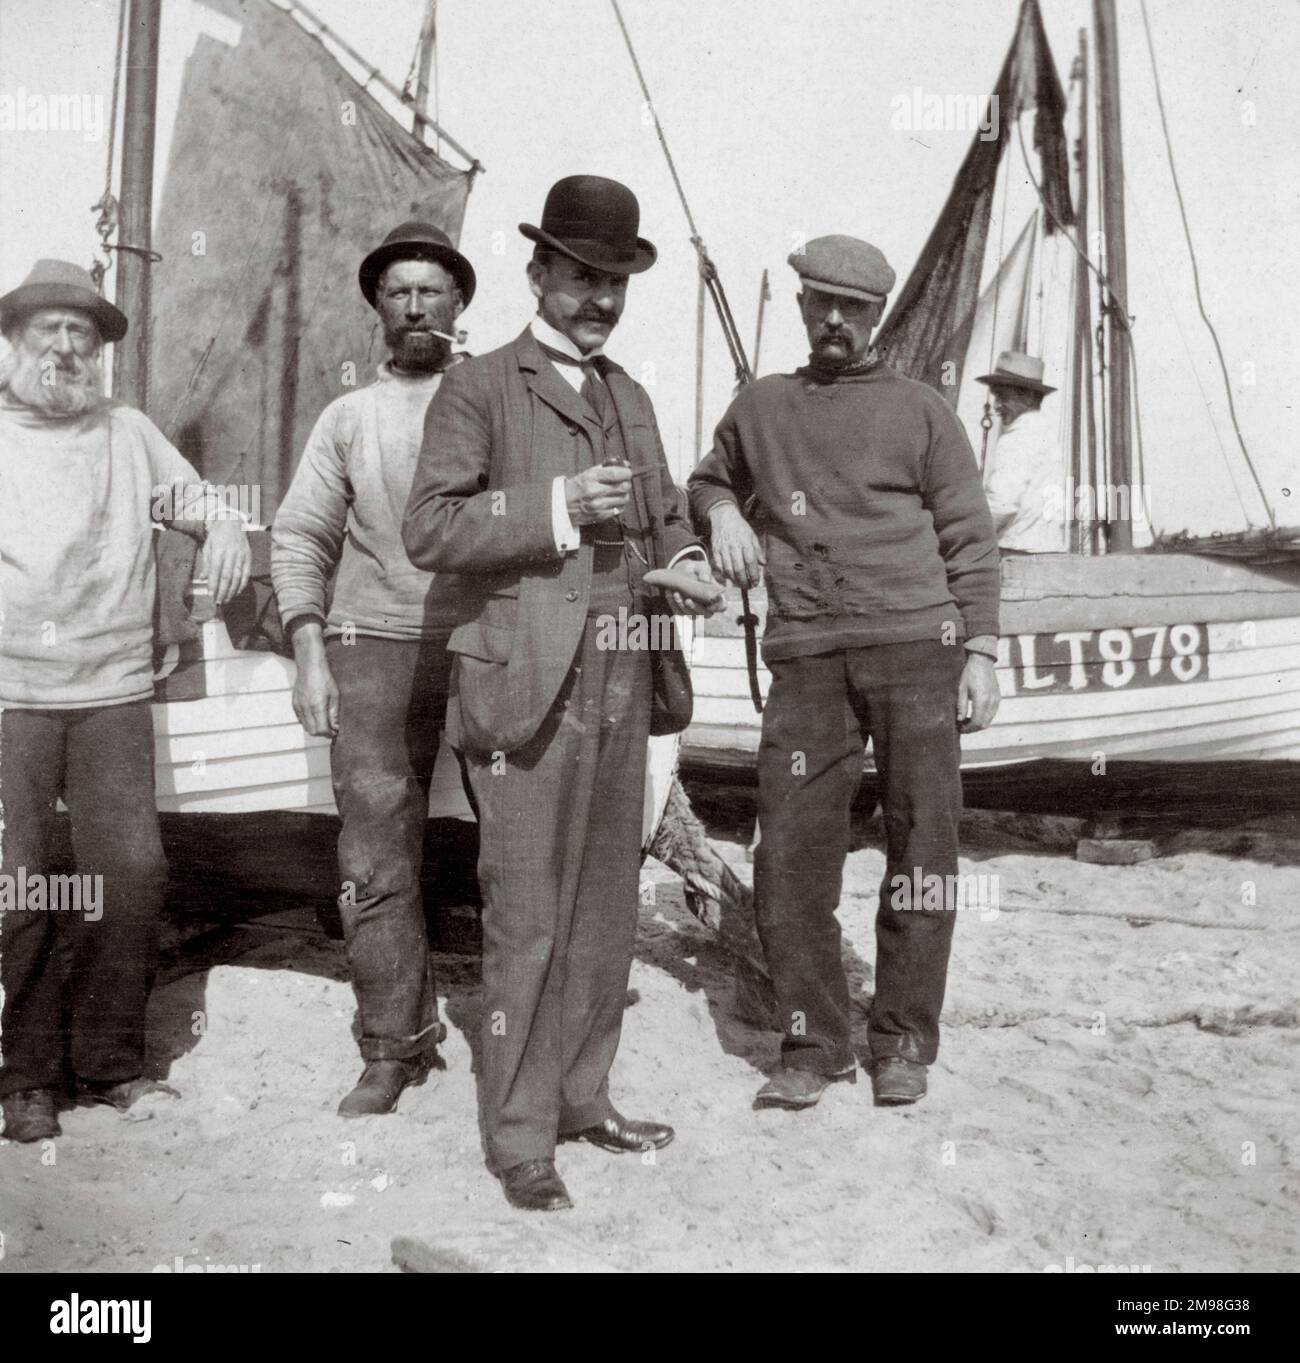 Fishermen Denny, Rogers, Craigie and Peck, on the beach with boats, Southwold, Suffolk.  The man in the suit and bowler hat is Arthur Auerbach. Stock Photo